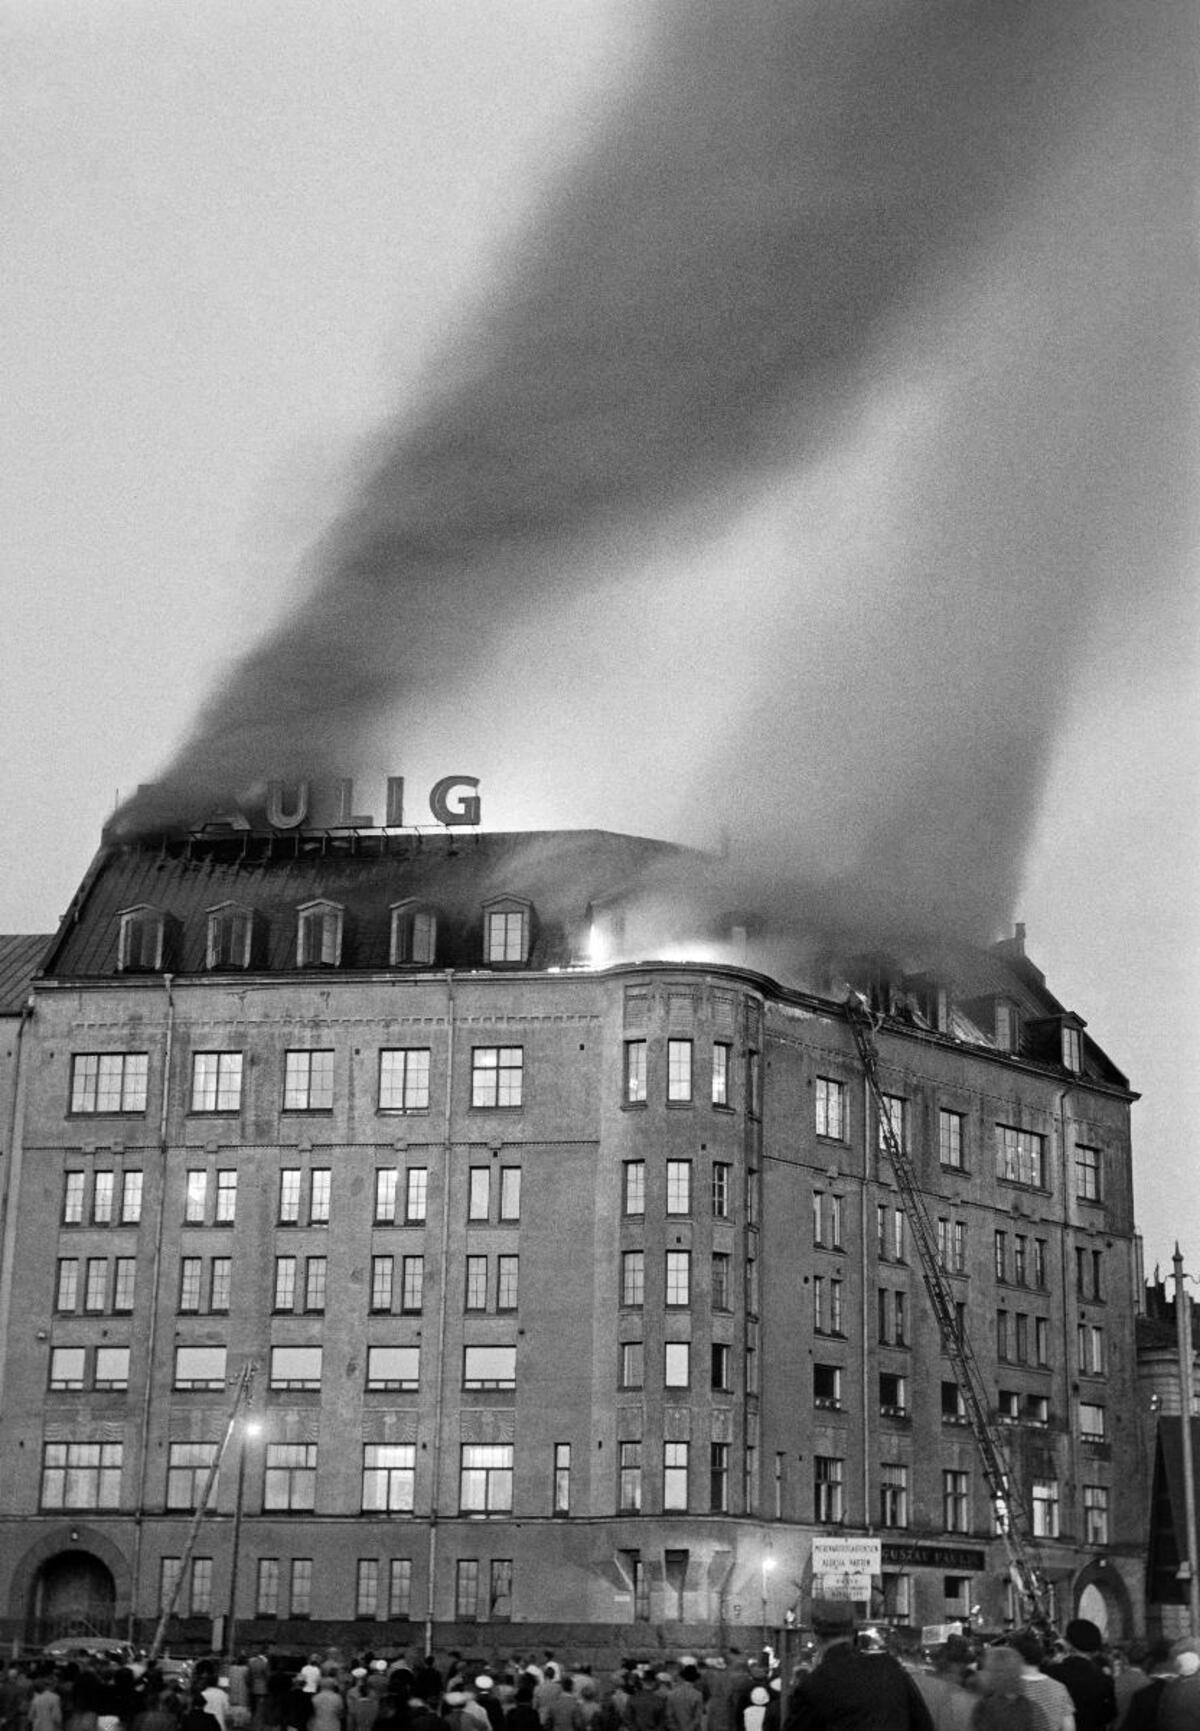 There was a large fire in the attic of the Paulig coffee roastery on 17 July 1940. The attic floor of the building was completely destroyed, and some coffee and substitute stock with it. “It should be noted that the London Fire Volunteers' gift wagon and its crew were also involved in the firefighting.” (Helsingin Sanomat 18 July 1940, page 3) Photo: Finnish National Board of Antiquities / Hugo Sundström